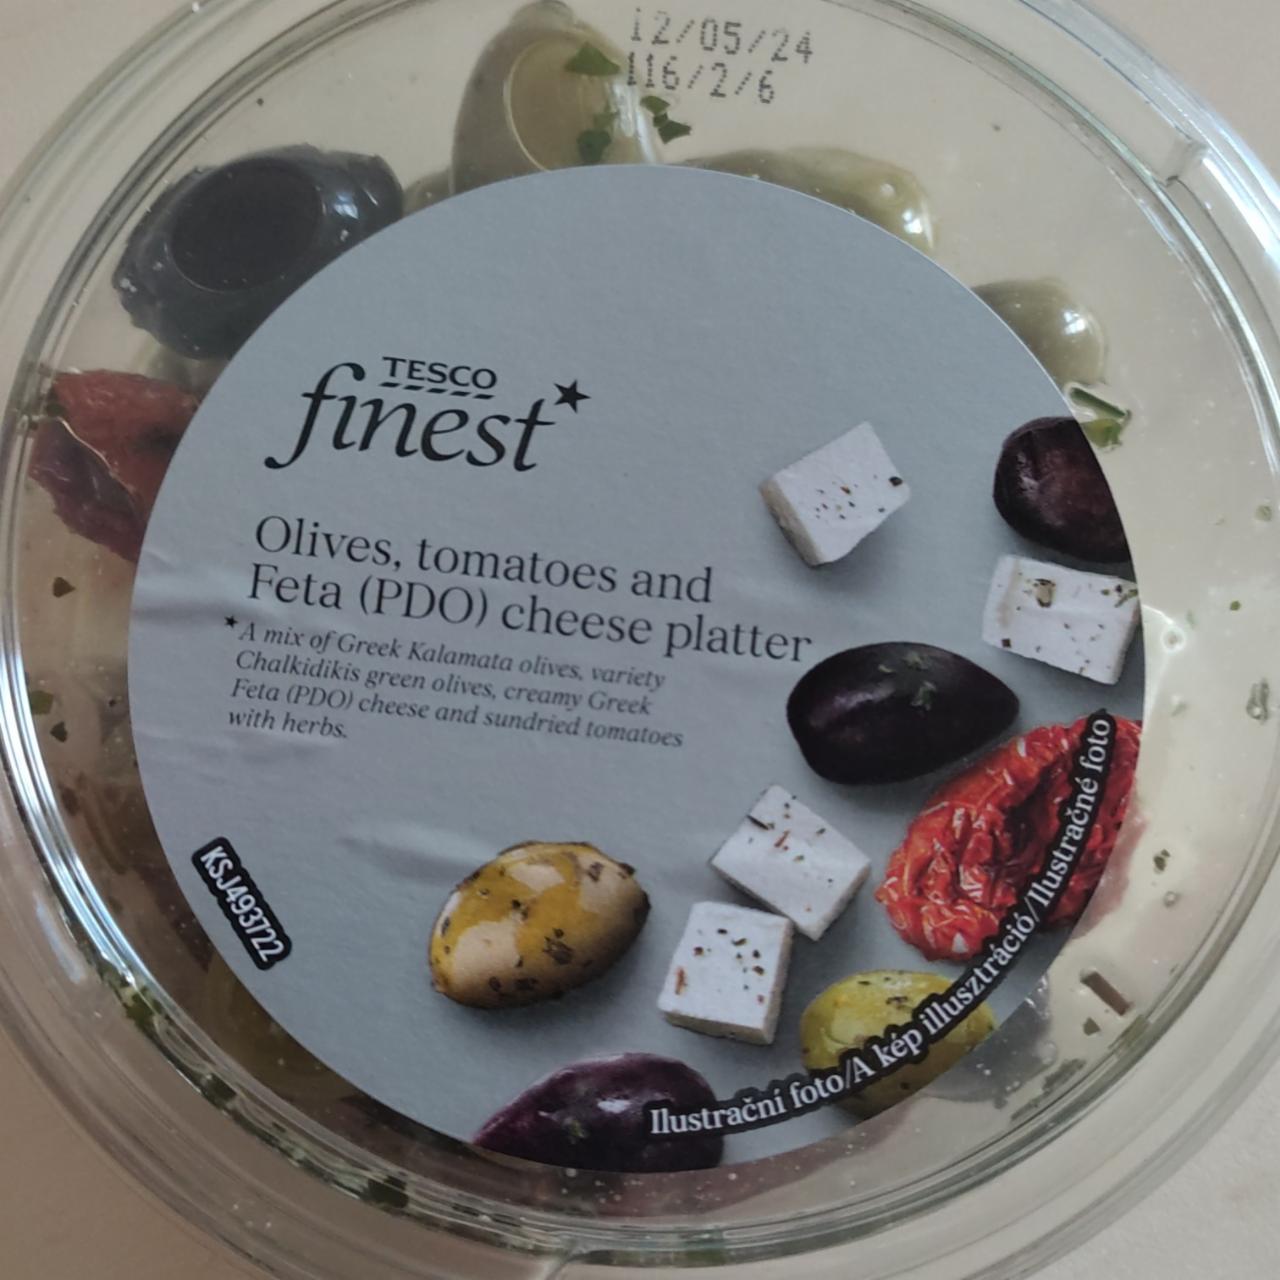 Fotografie - Olives, tomatoes And Feta (PDO) cheese platter Tesco finest